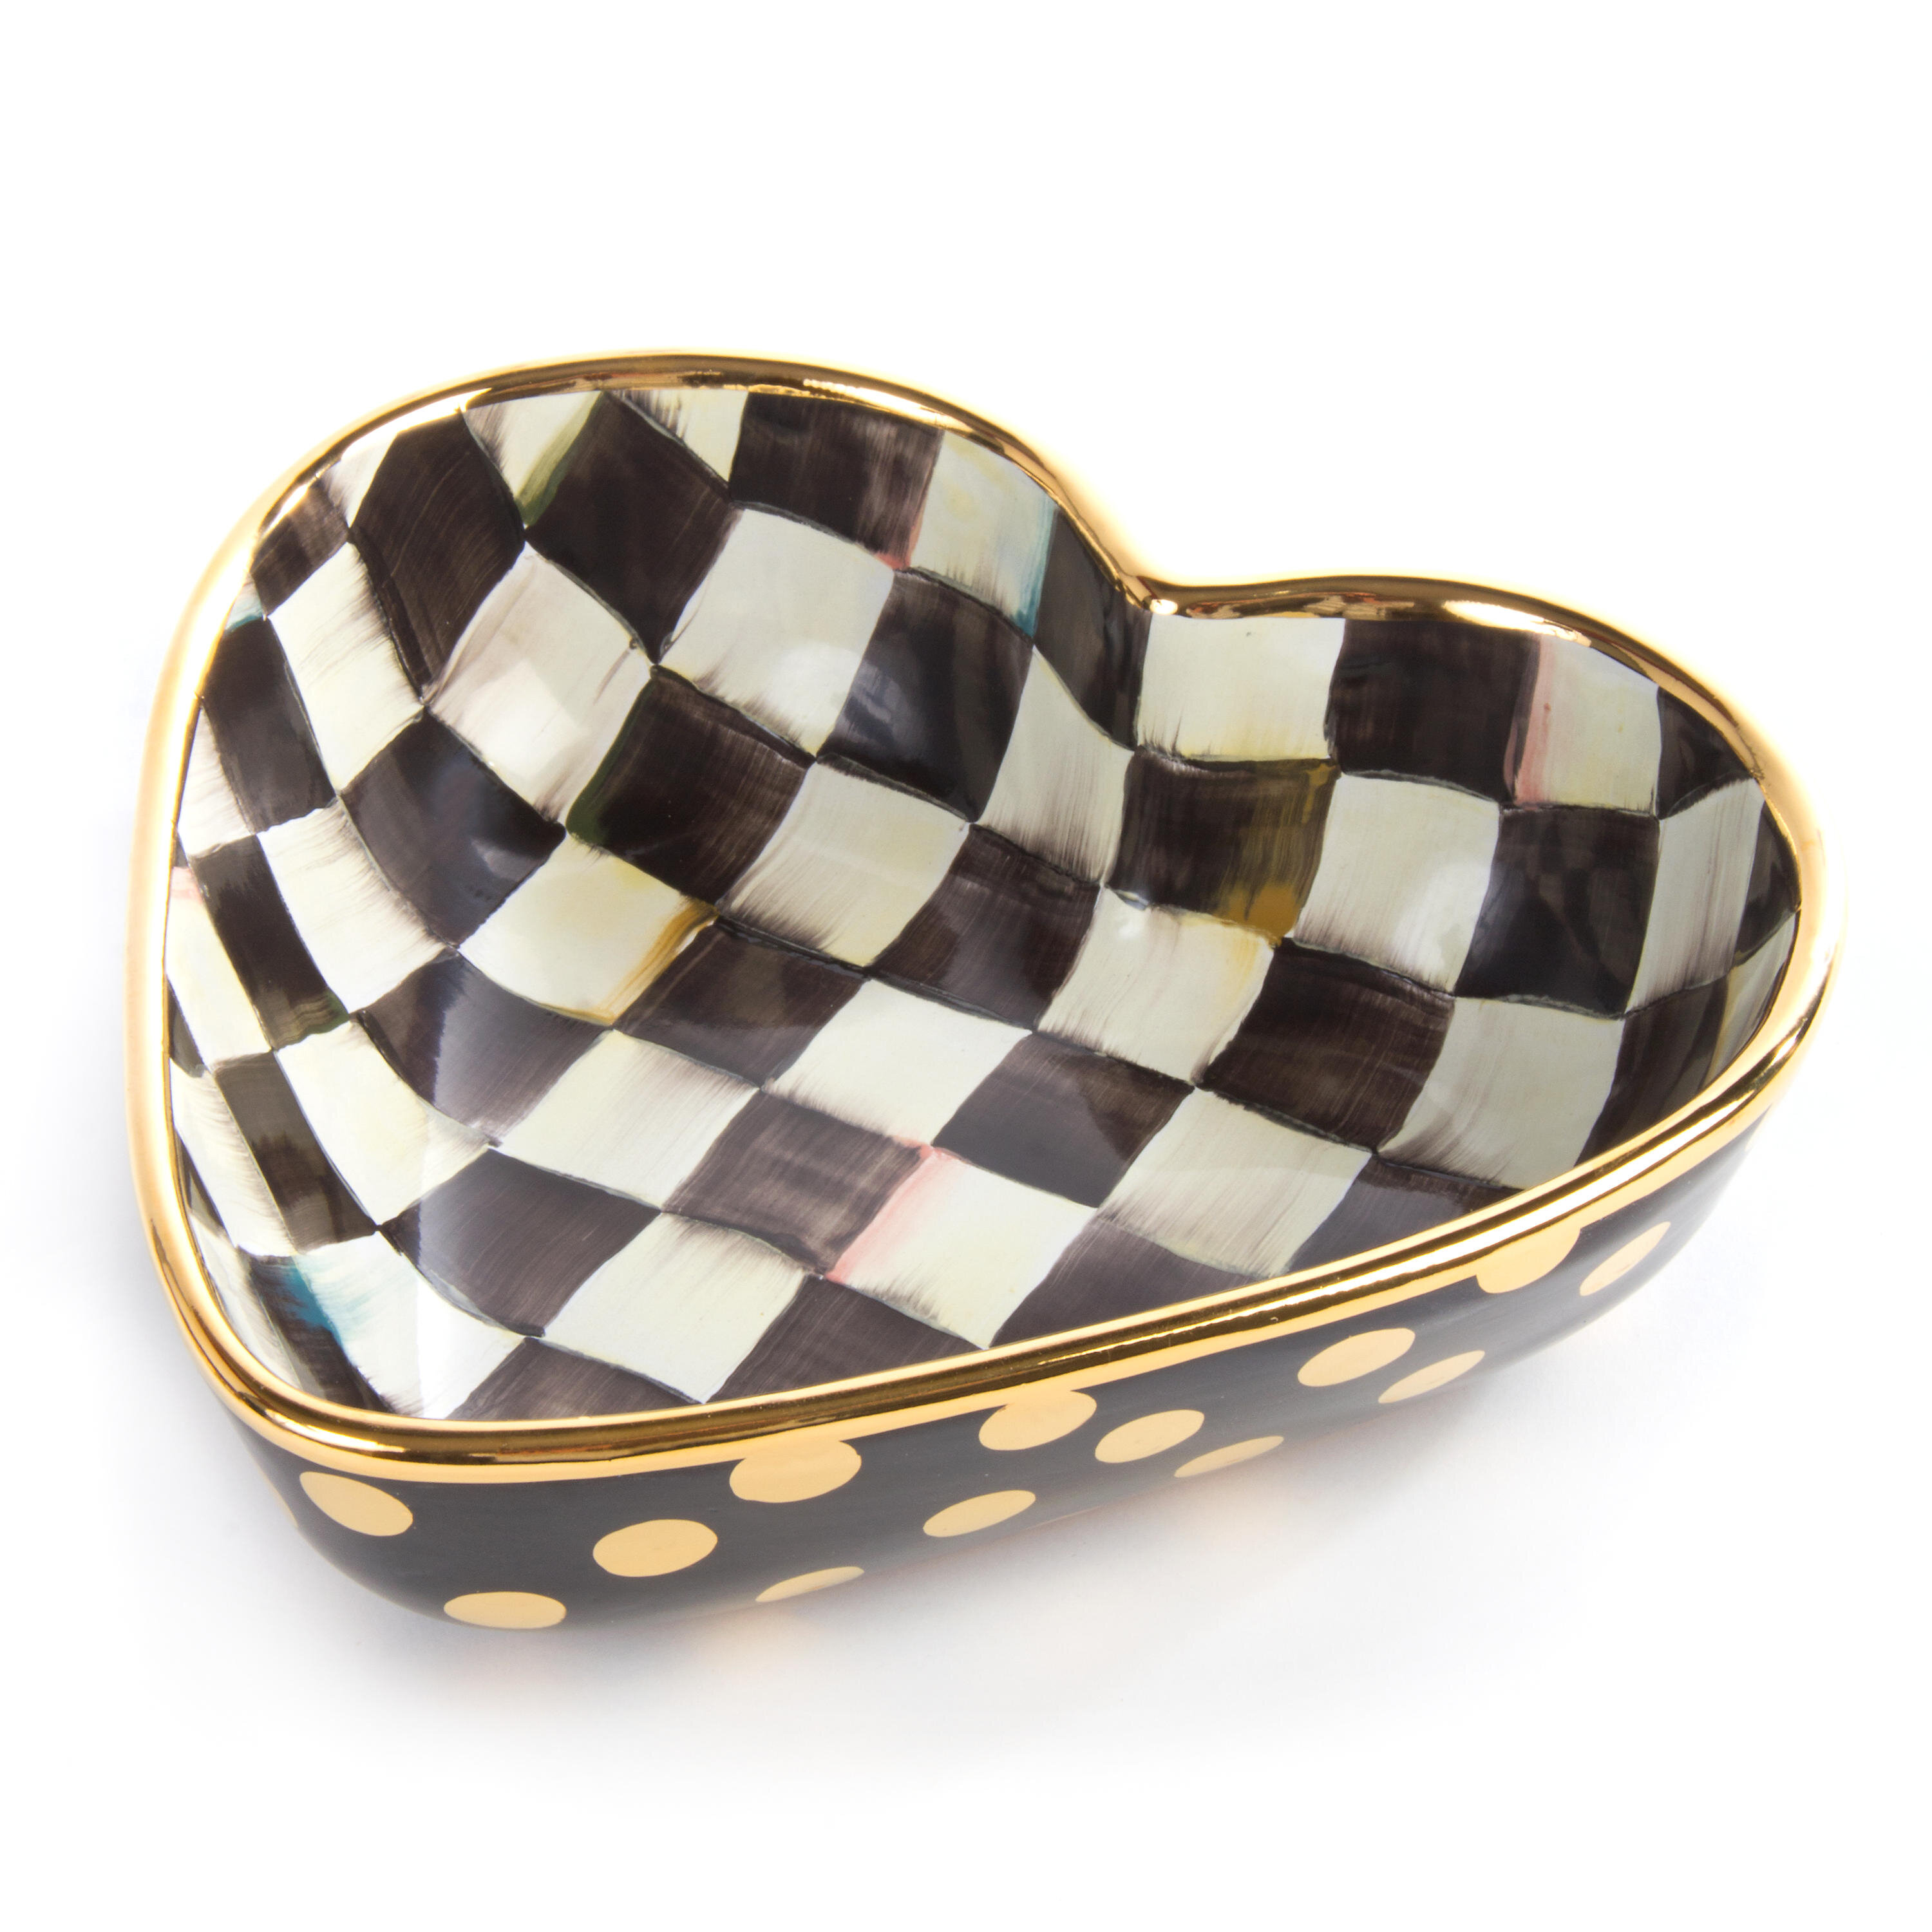 Courtly Check® Heart Bowl - Large